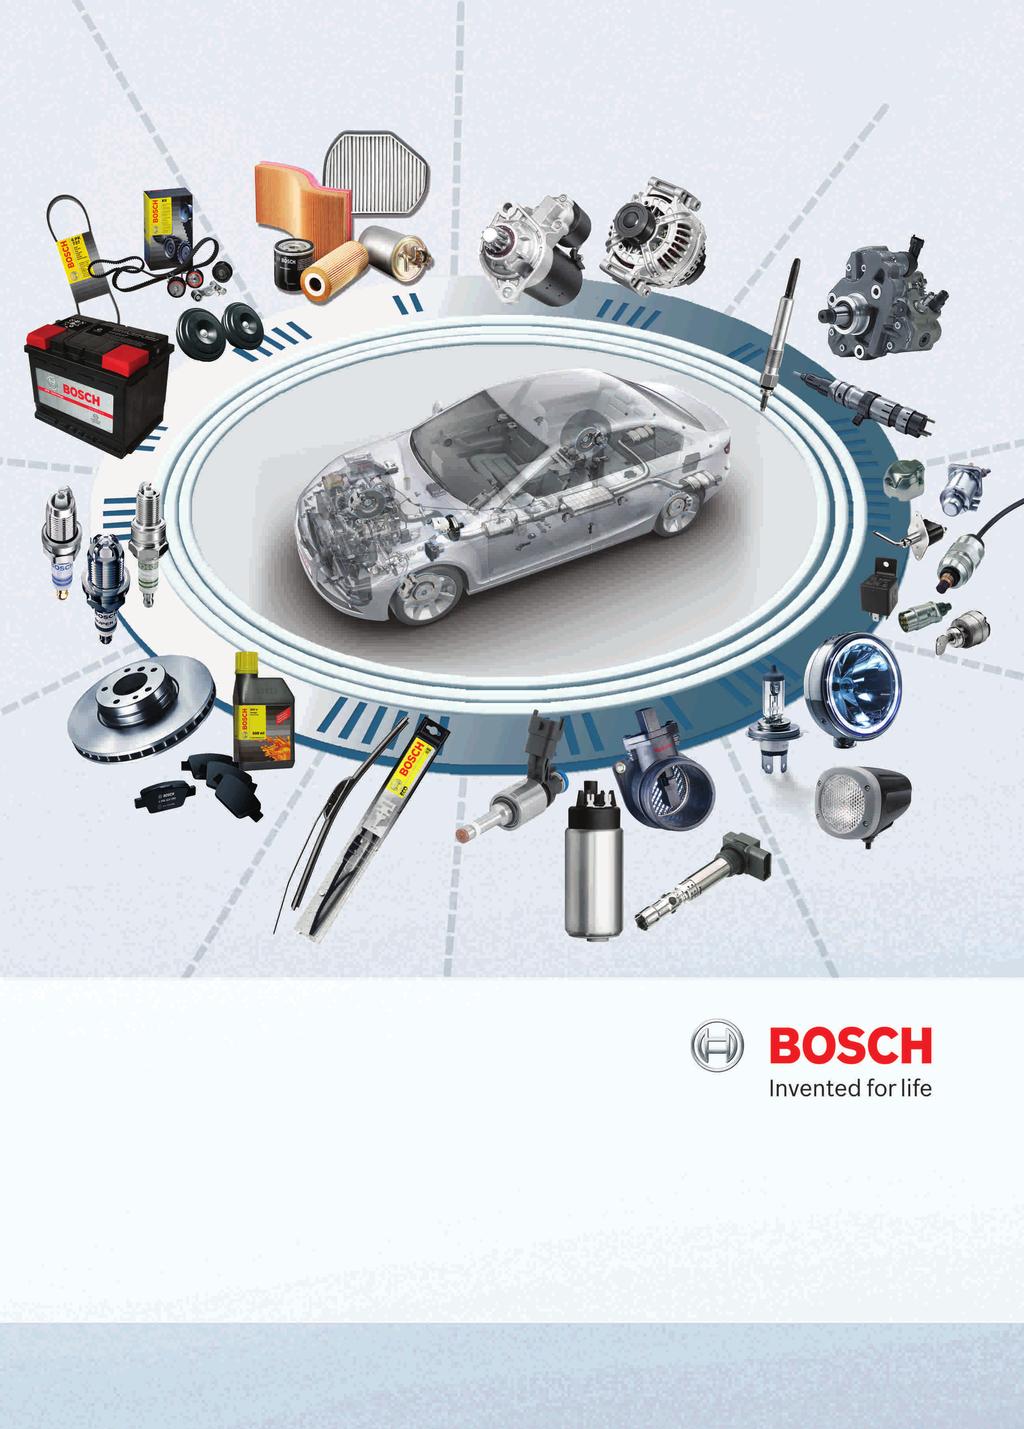 No vehicle is complete without Bosch Your vehicle is not complete without world-class automotive components from Bosch.